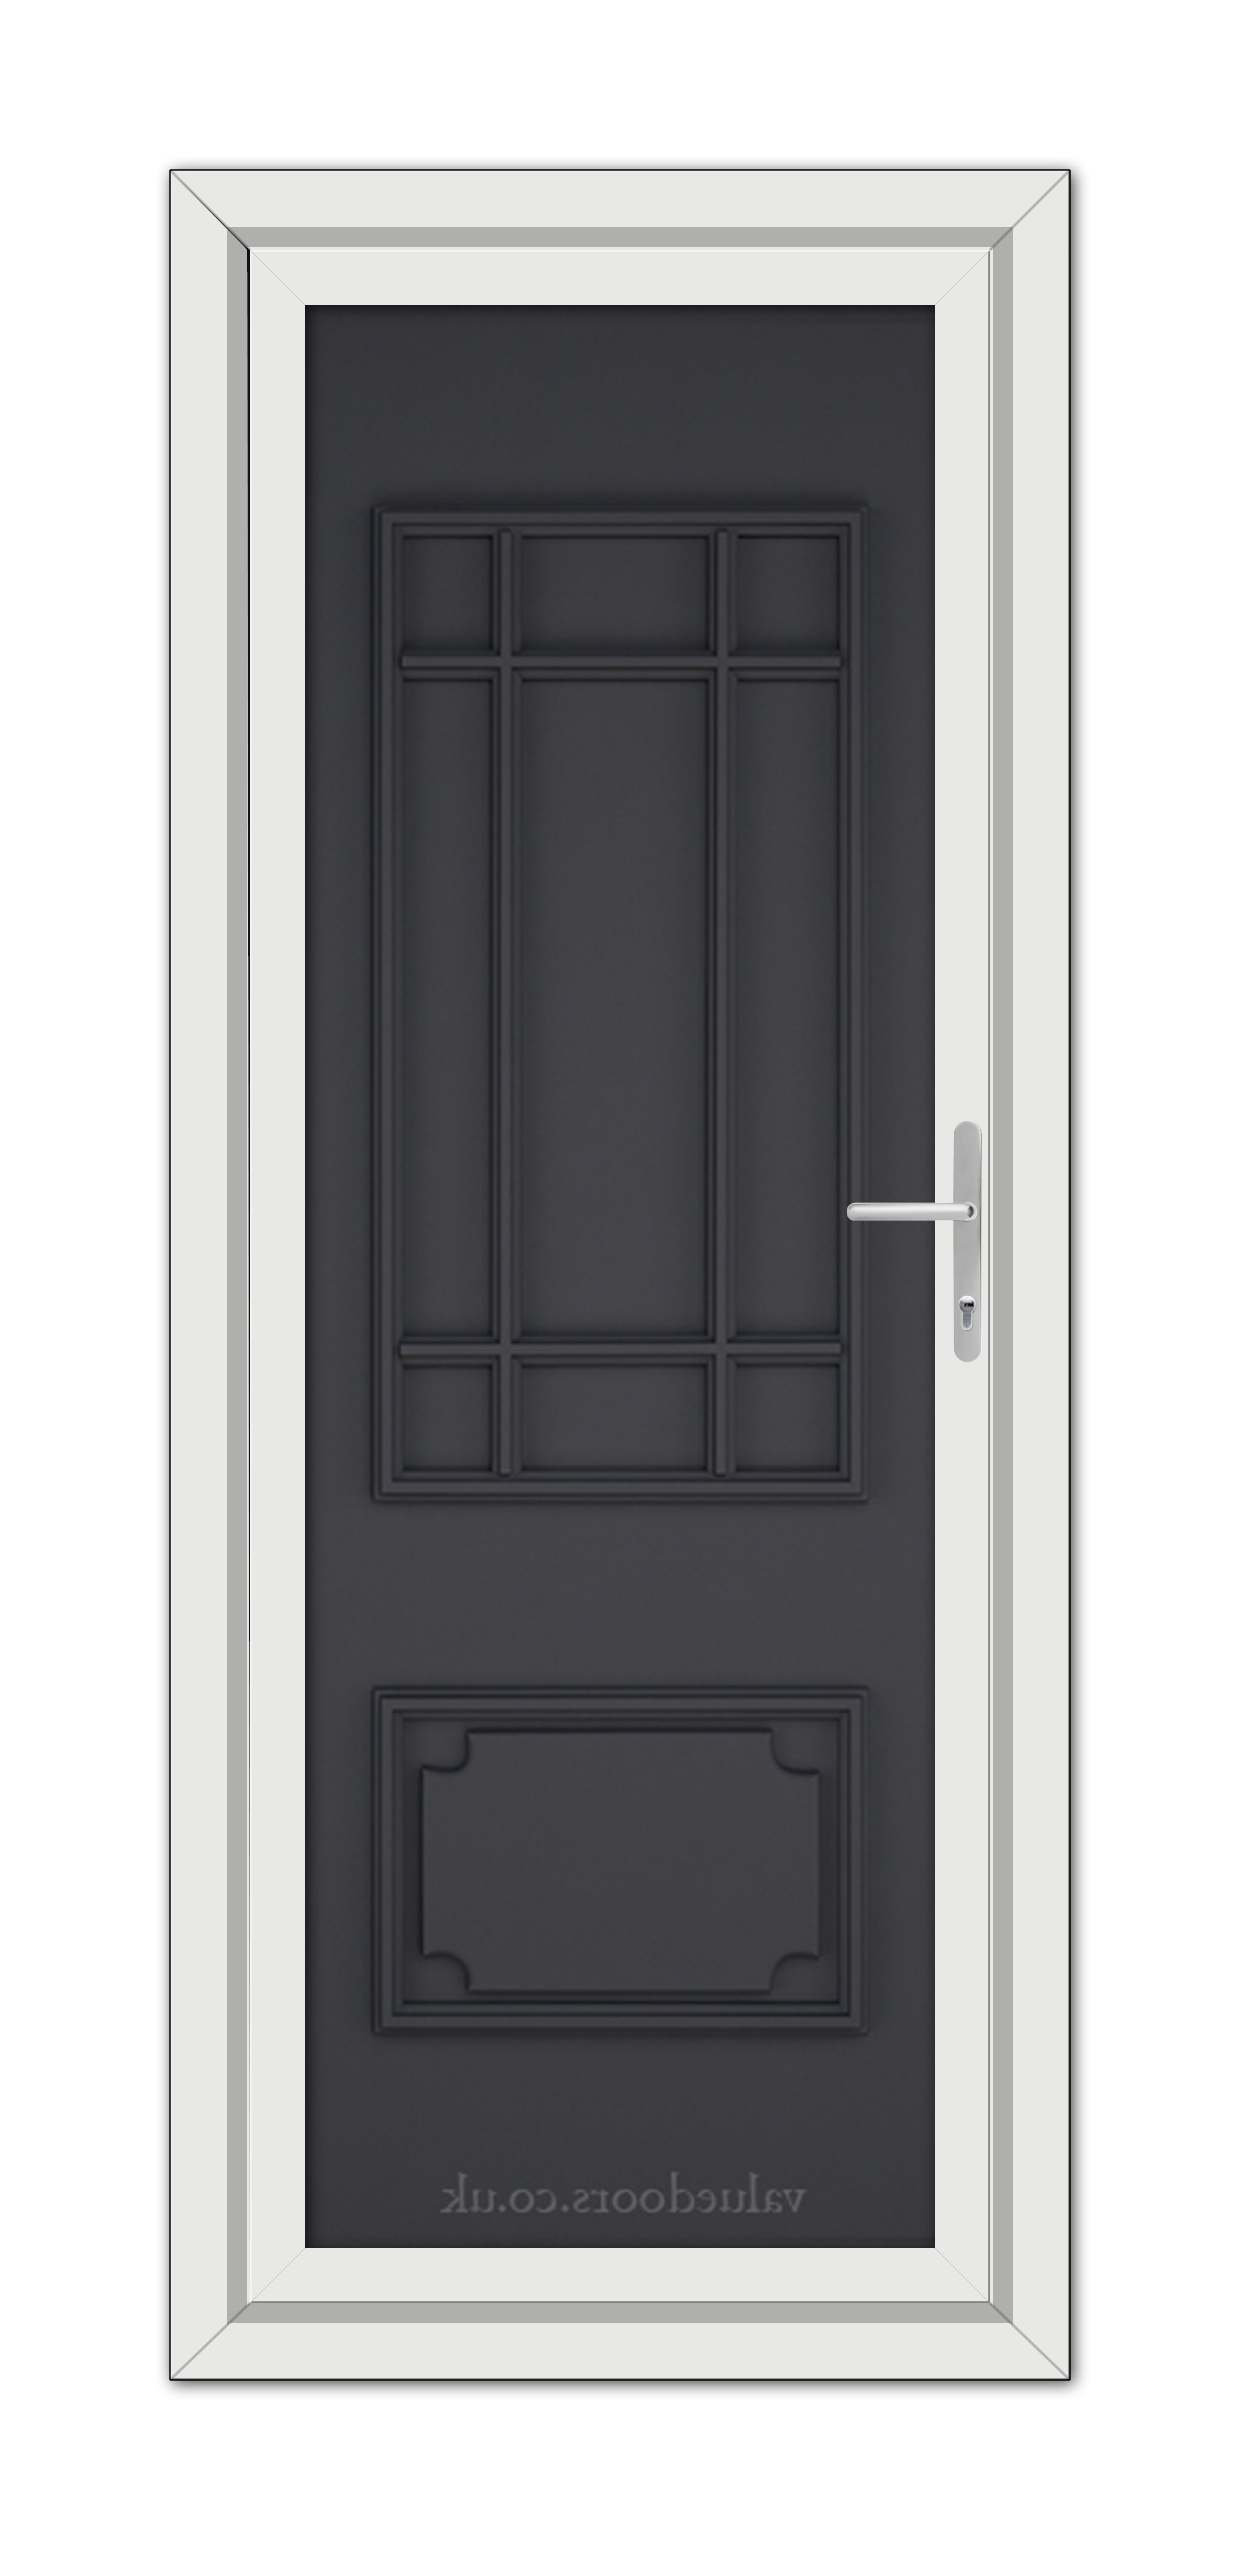 A modern Grey Seville Solid uPVC door with six panels and a silver handle, framed within a white door frame, viewed from the front.